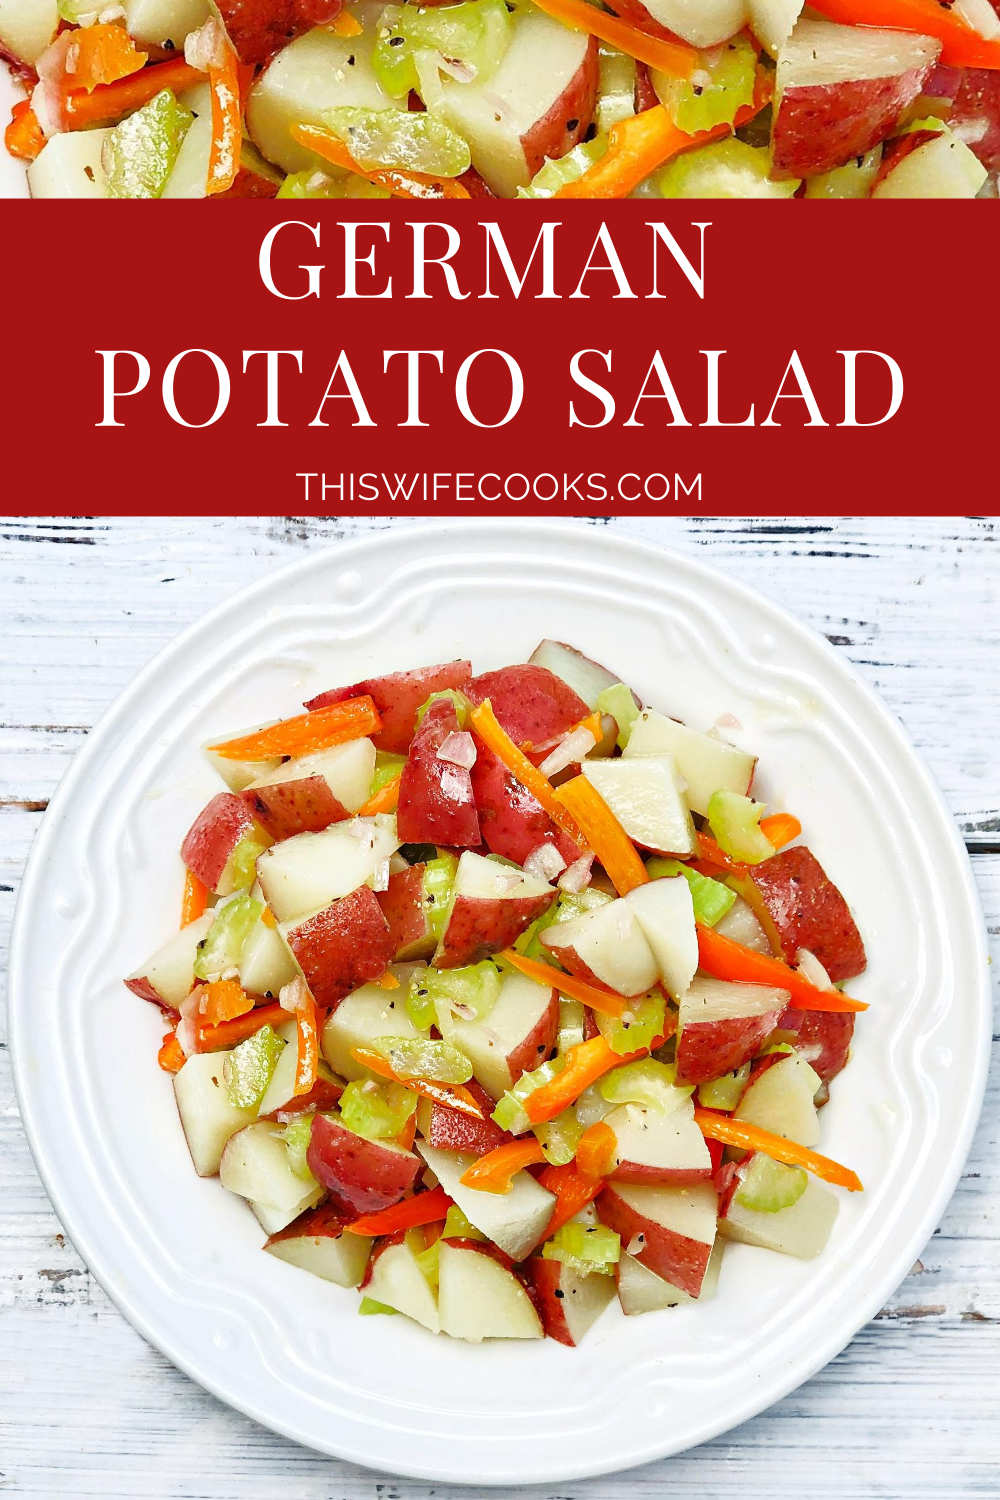 German Potato Salad ~ A tangy Dijon and vinegar-based potato salad made with baby red potatoes, celery, shallot, and sweet bell peppers. Ready to serve in 20 minutes or less! via @thiswifecooks